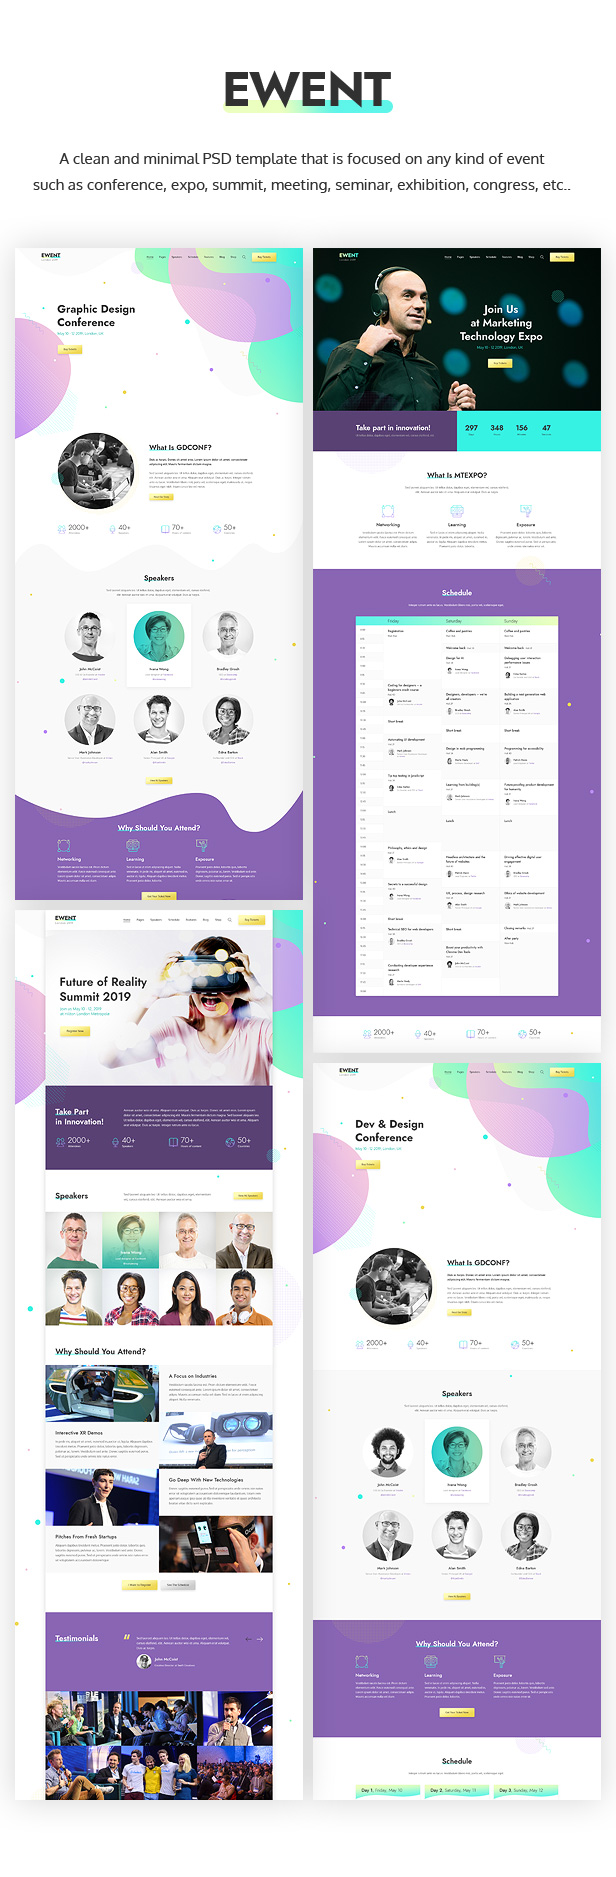 Ewent - Event & Conference PSD Template - 1